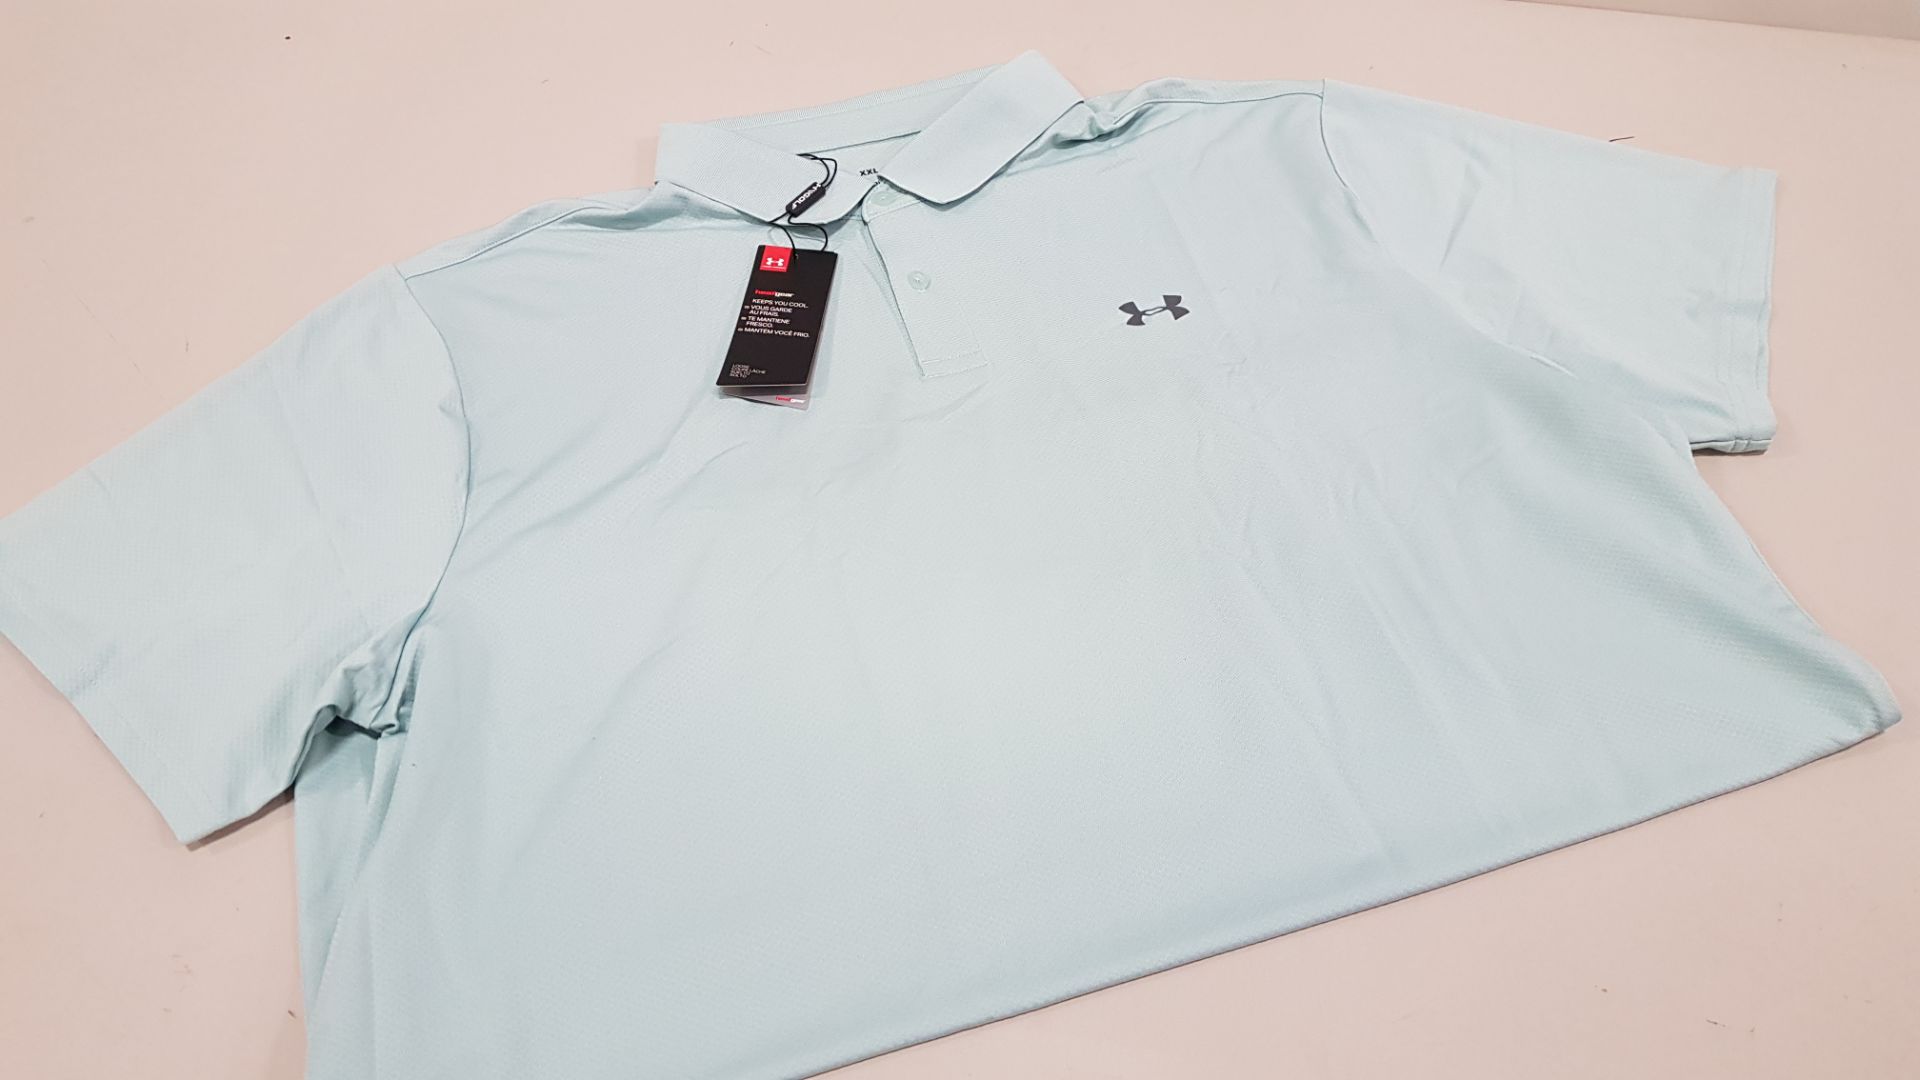 15 X BRAND NEW UNDER ARMOUR BAGGED PERFORM POLO IN ENAMEL BLUE (VARIOUS SIZES M - 2XL) - PICK